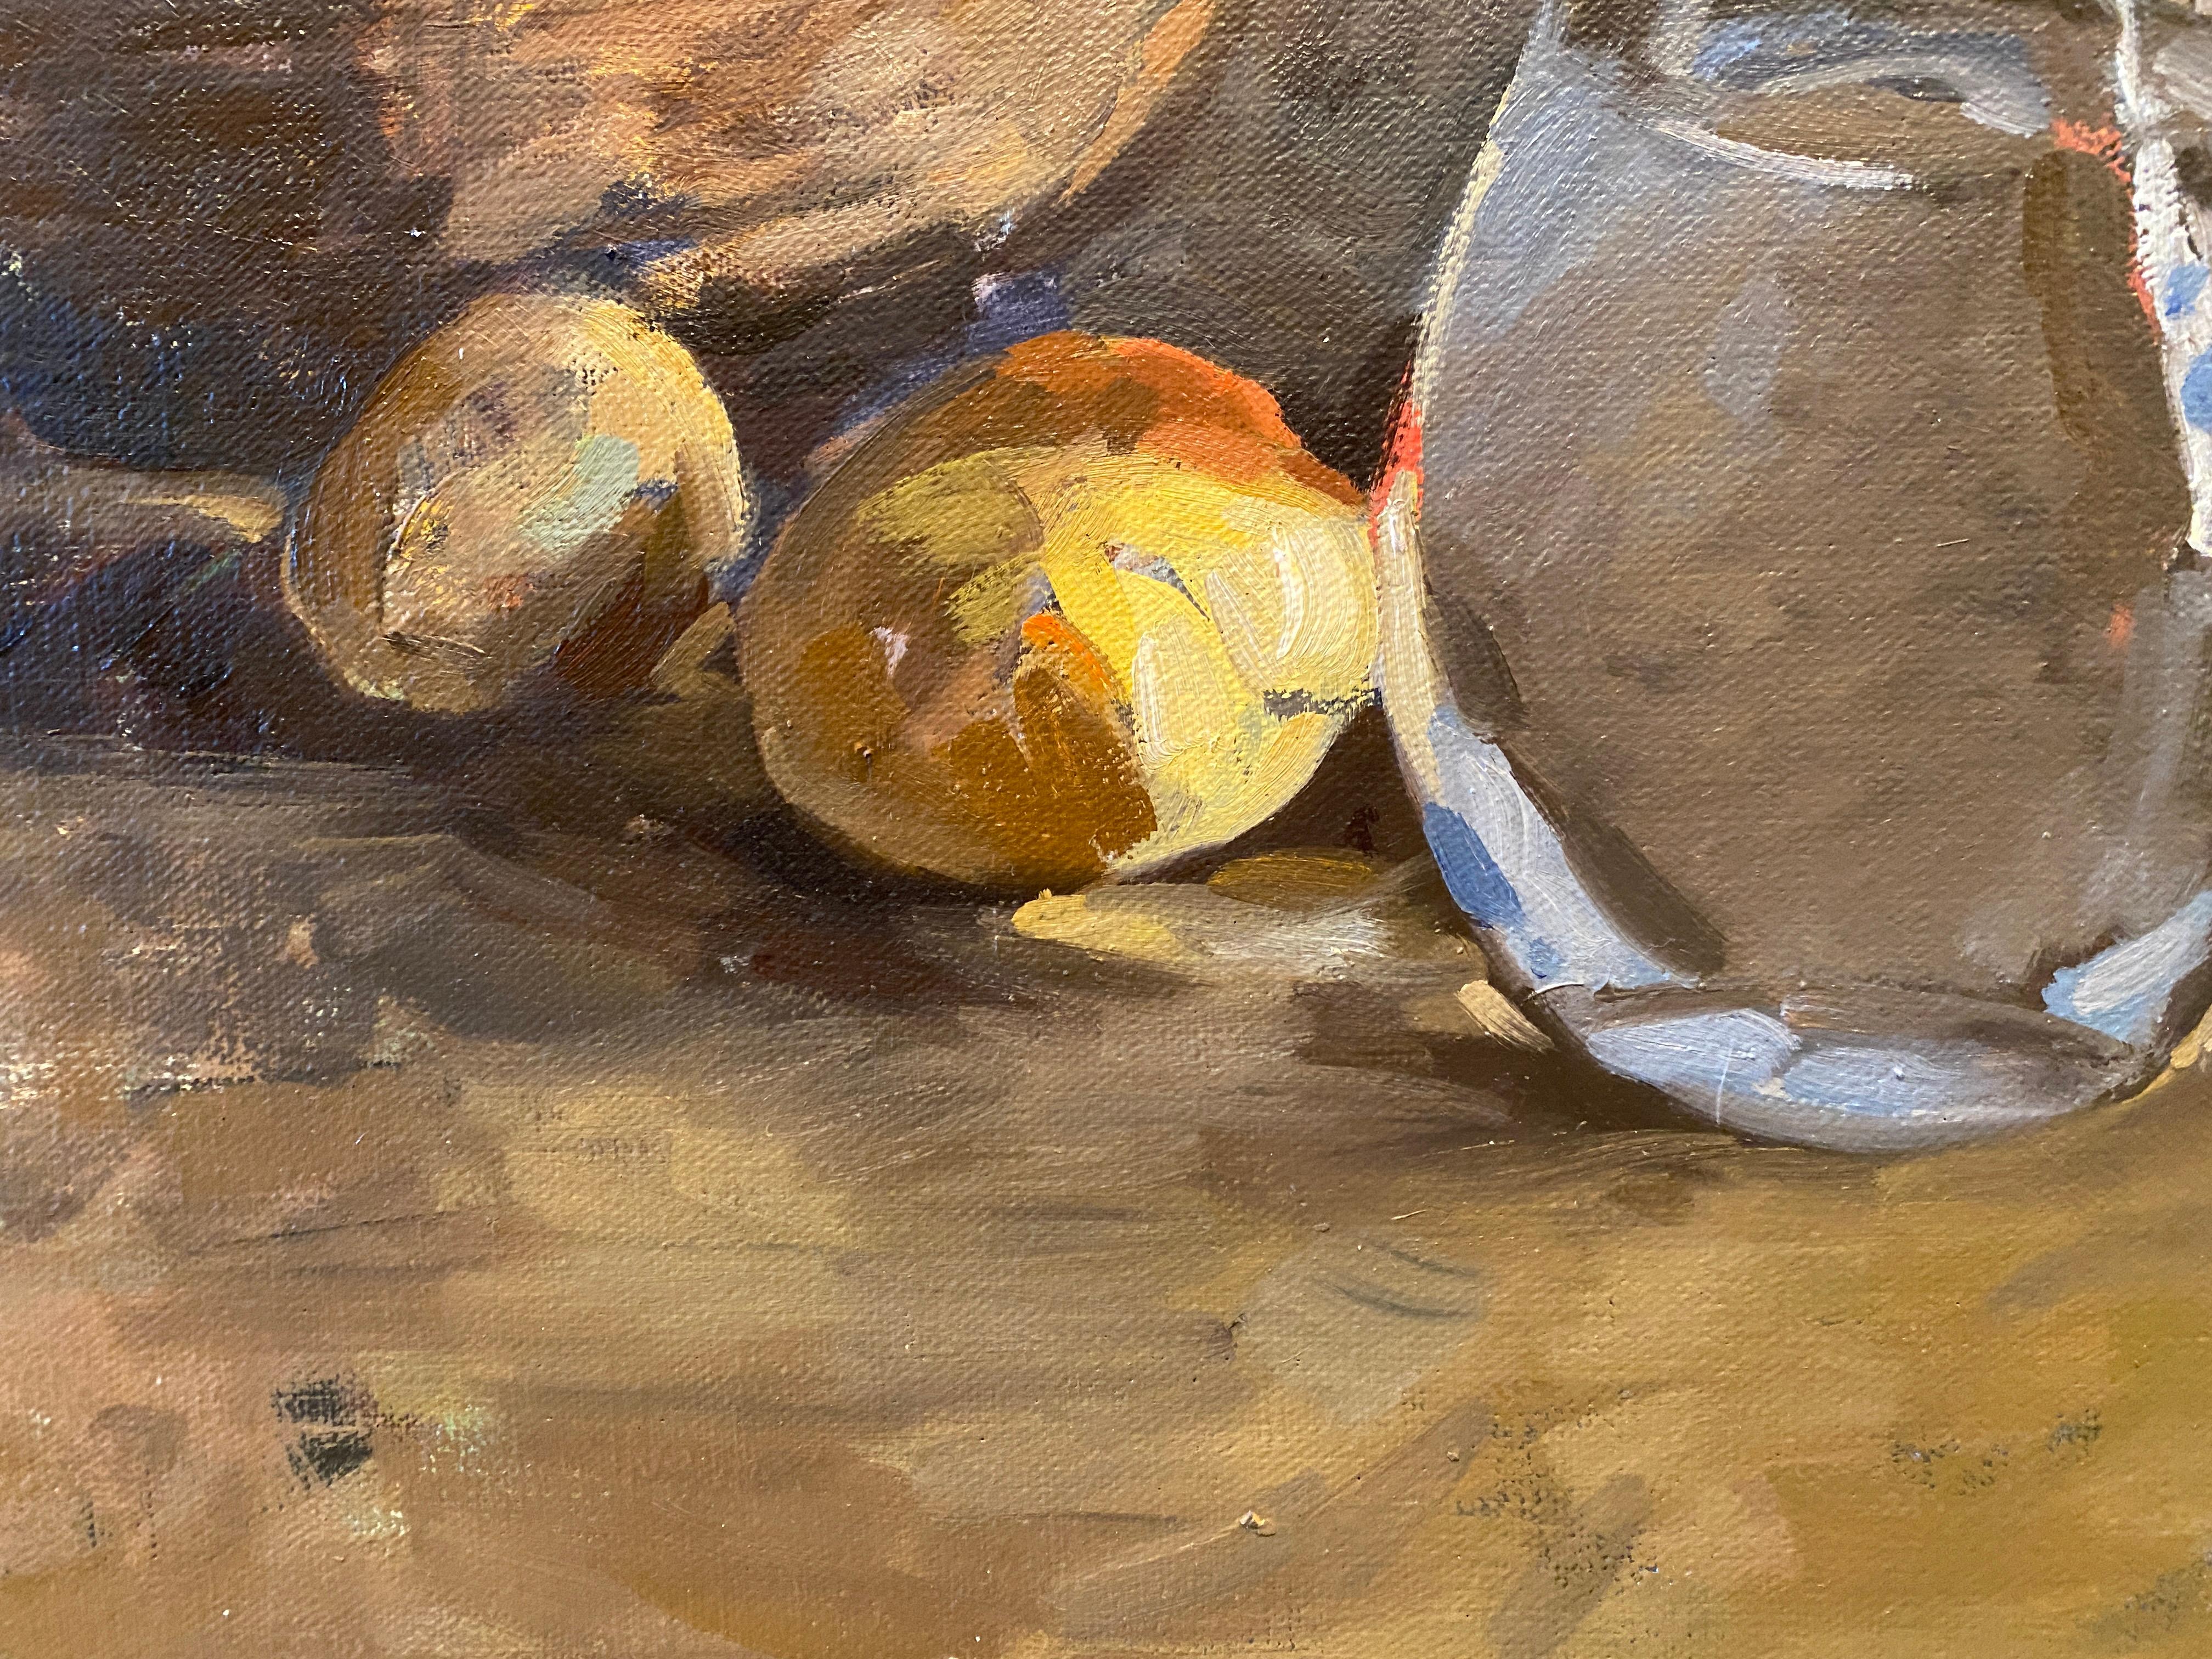 Salt and Potatoes  - Impressionist Painting by Amy Florence